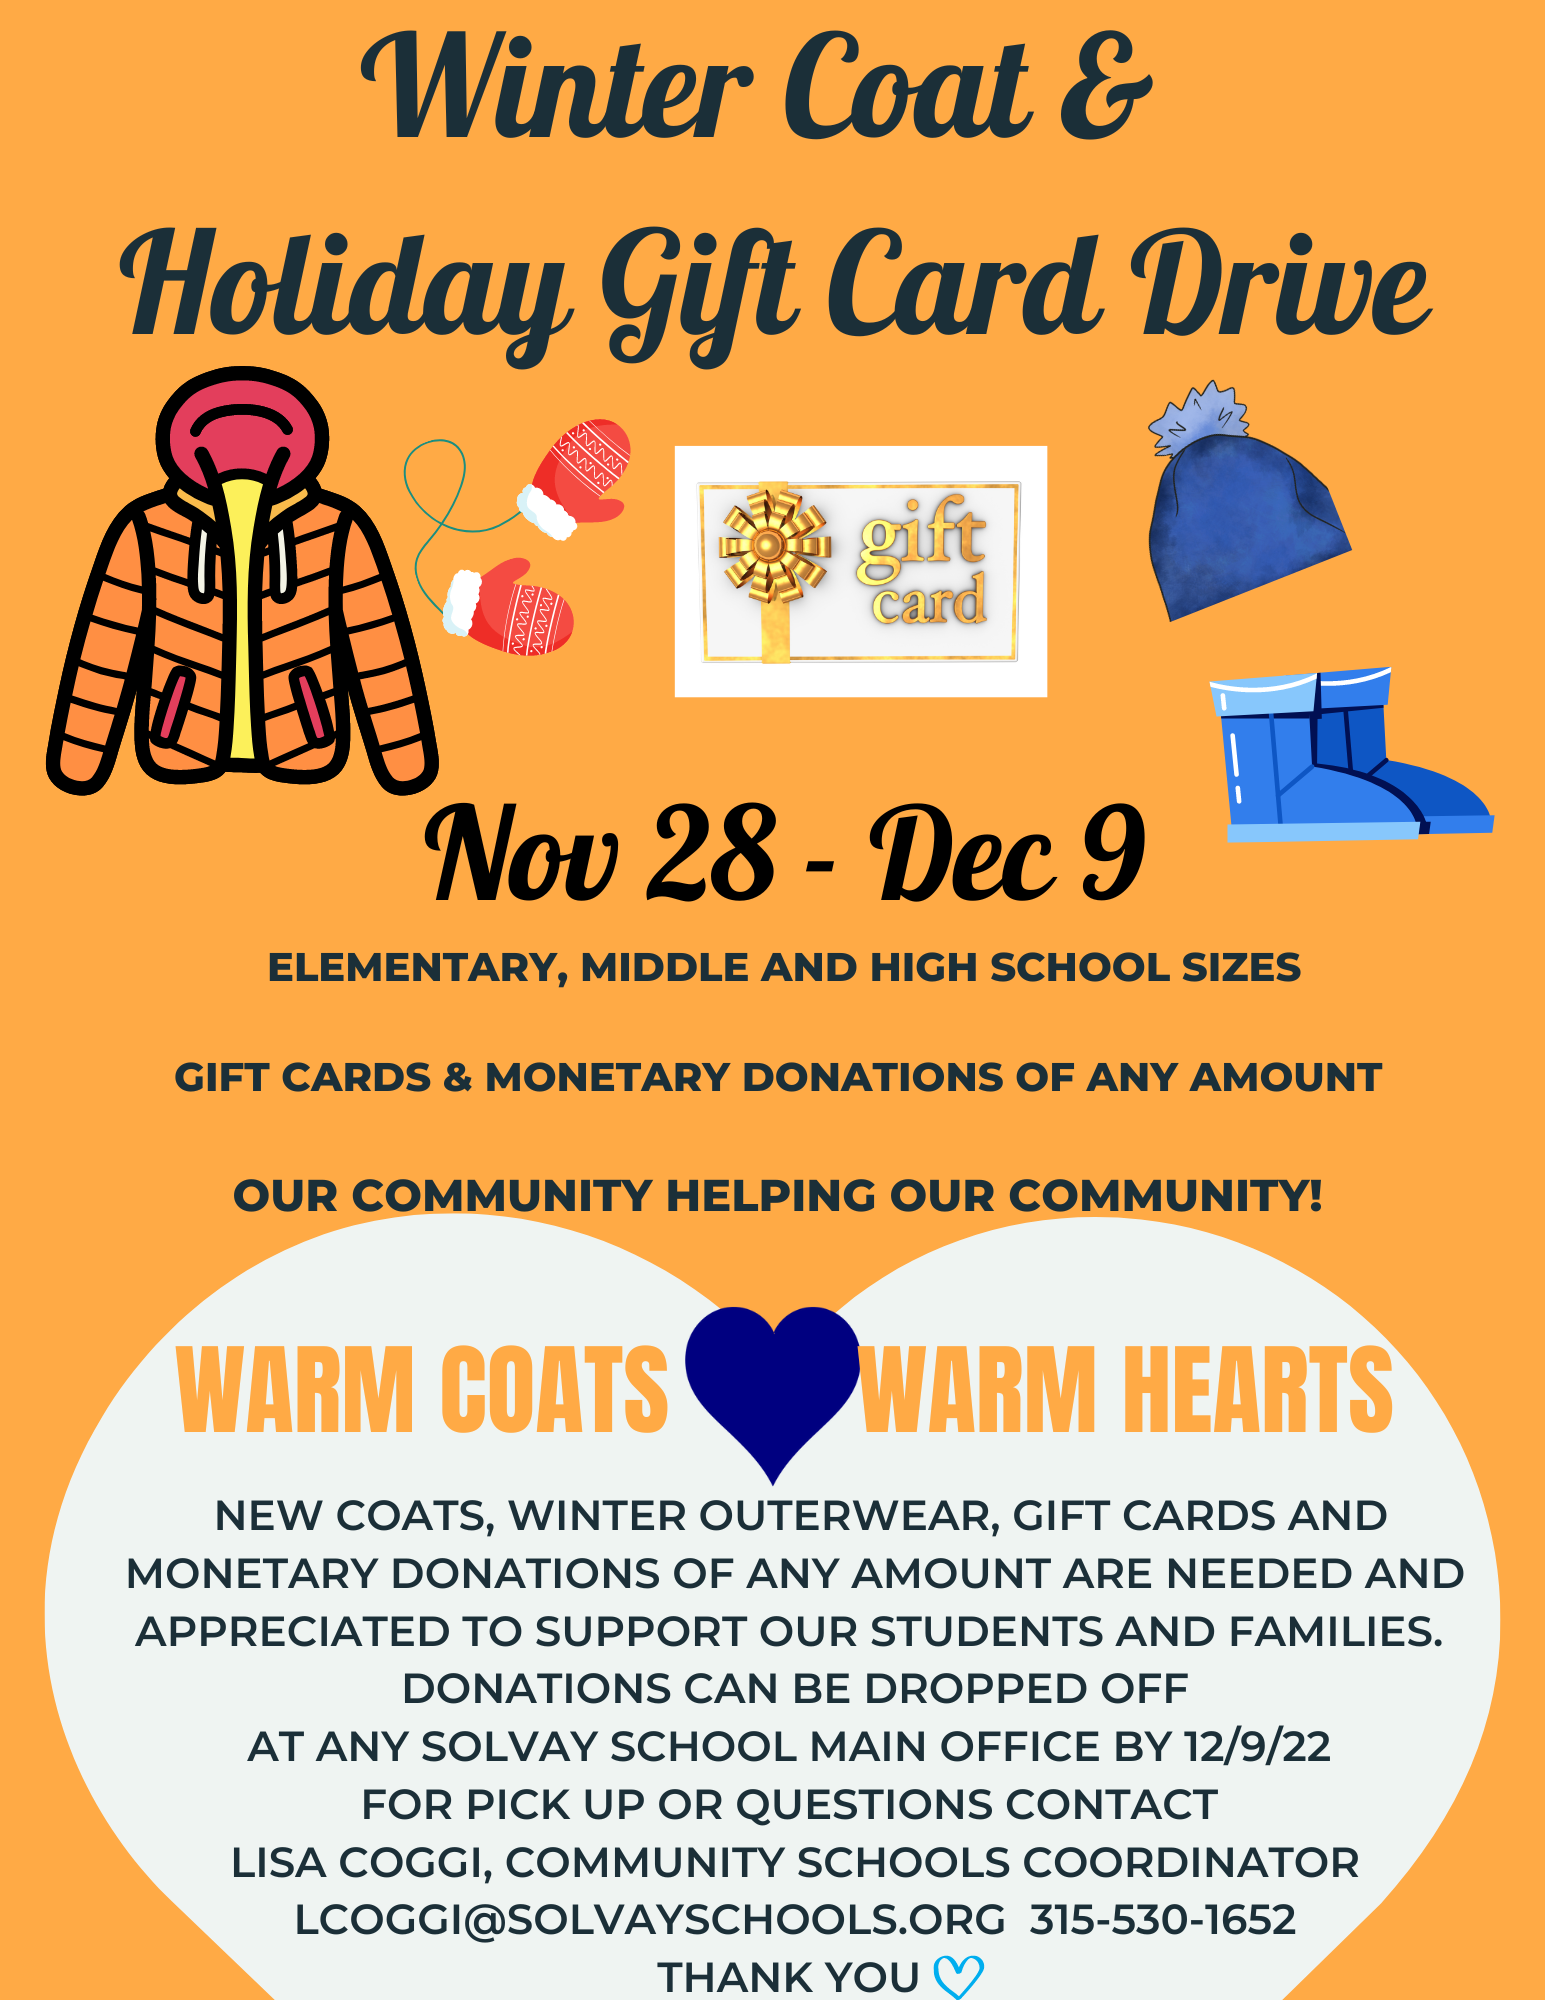 WINTER COAT AND HOLIDAY GIFT DRIVE - DONATIONS ACCEPTED UNTIL 12/9 AT ANY SOLVAY SCHOOLS MAIN OFFICE